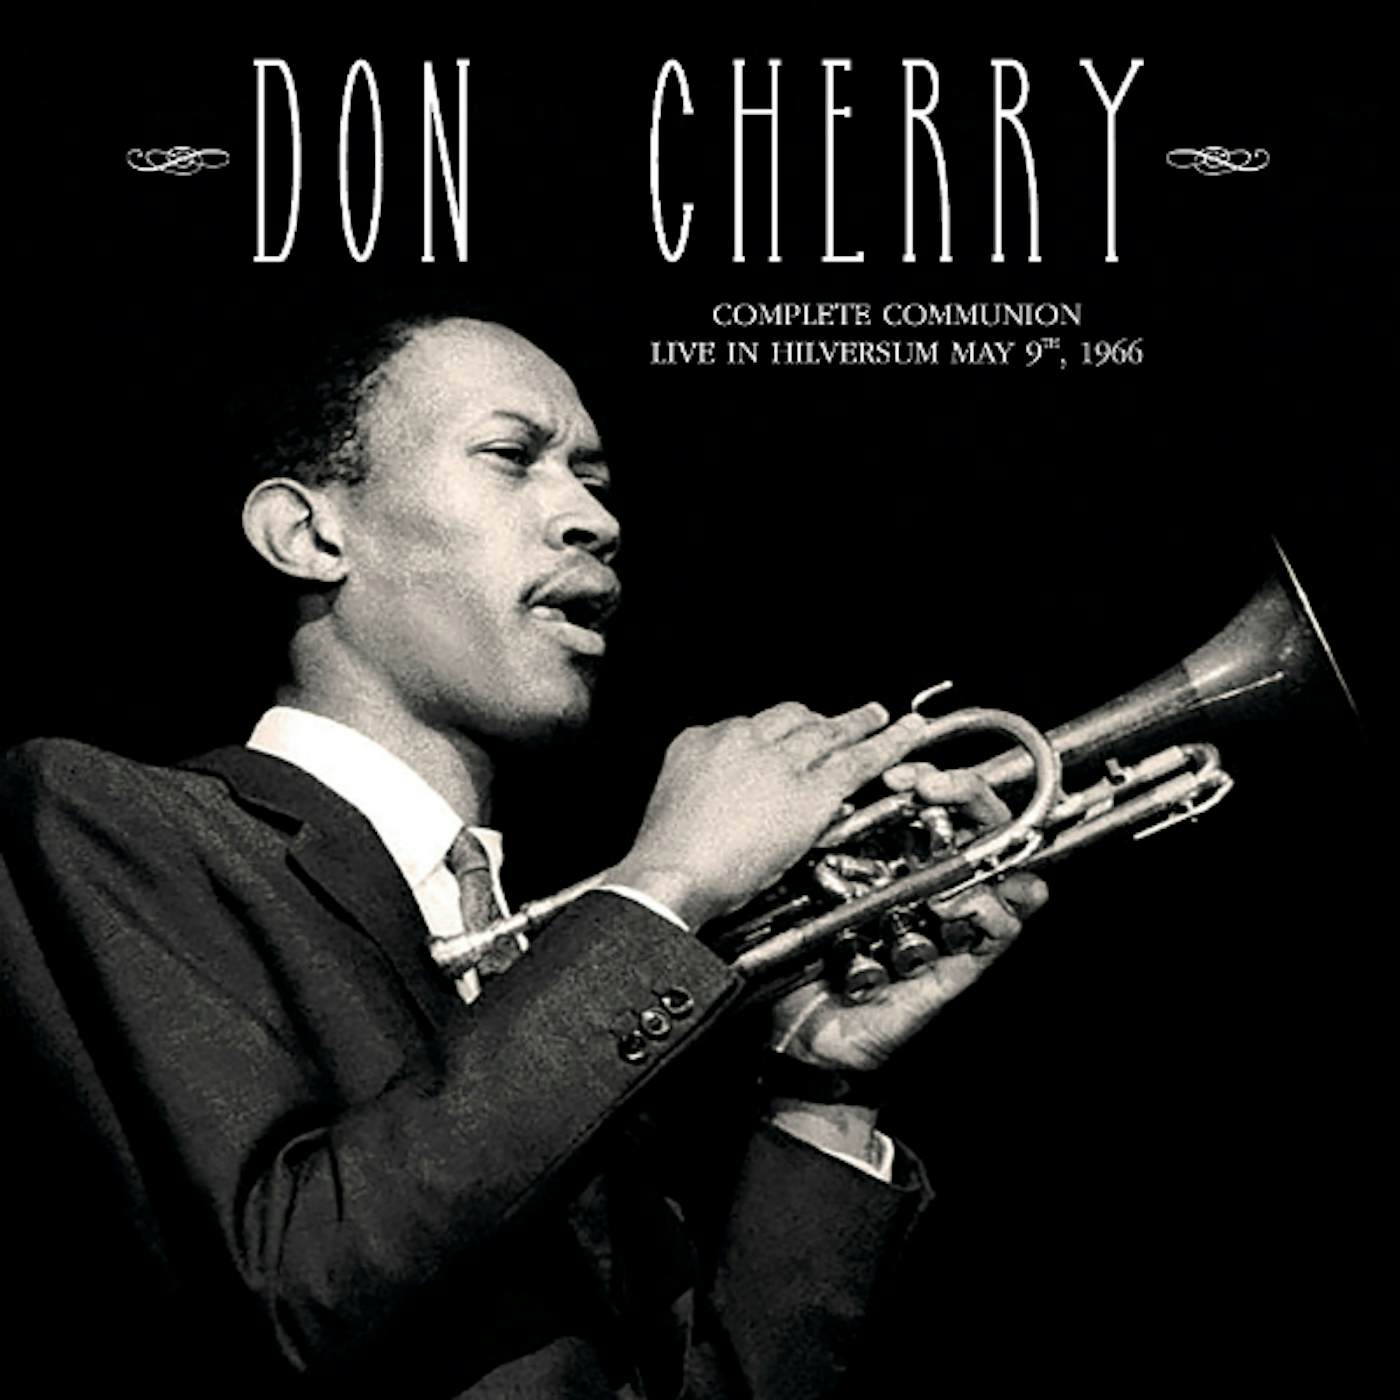 Don Cherry COMPLETE COMMUNION: LIVE IN HILVERSUM MAY 9TH 1966 Vinyl Record